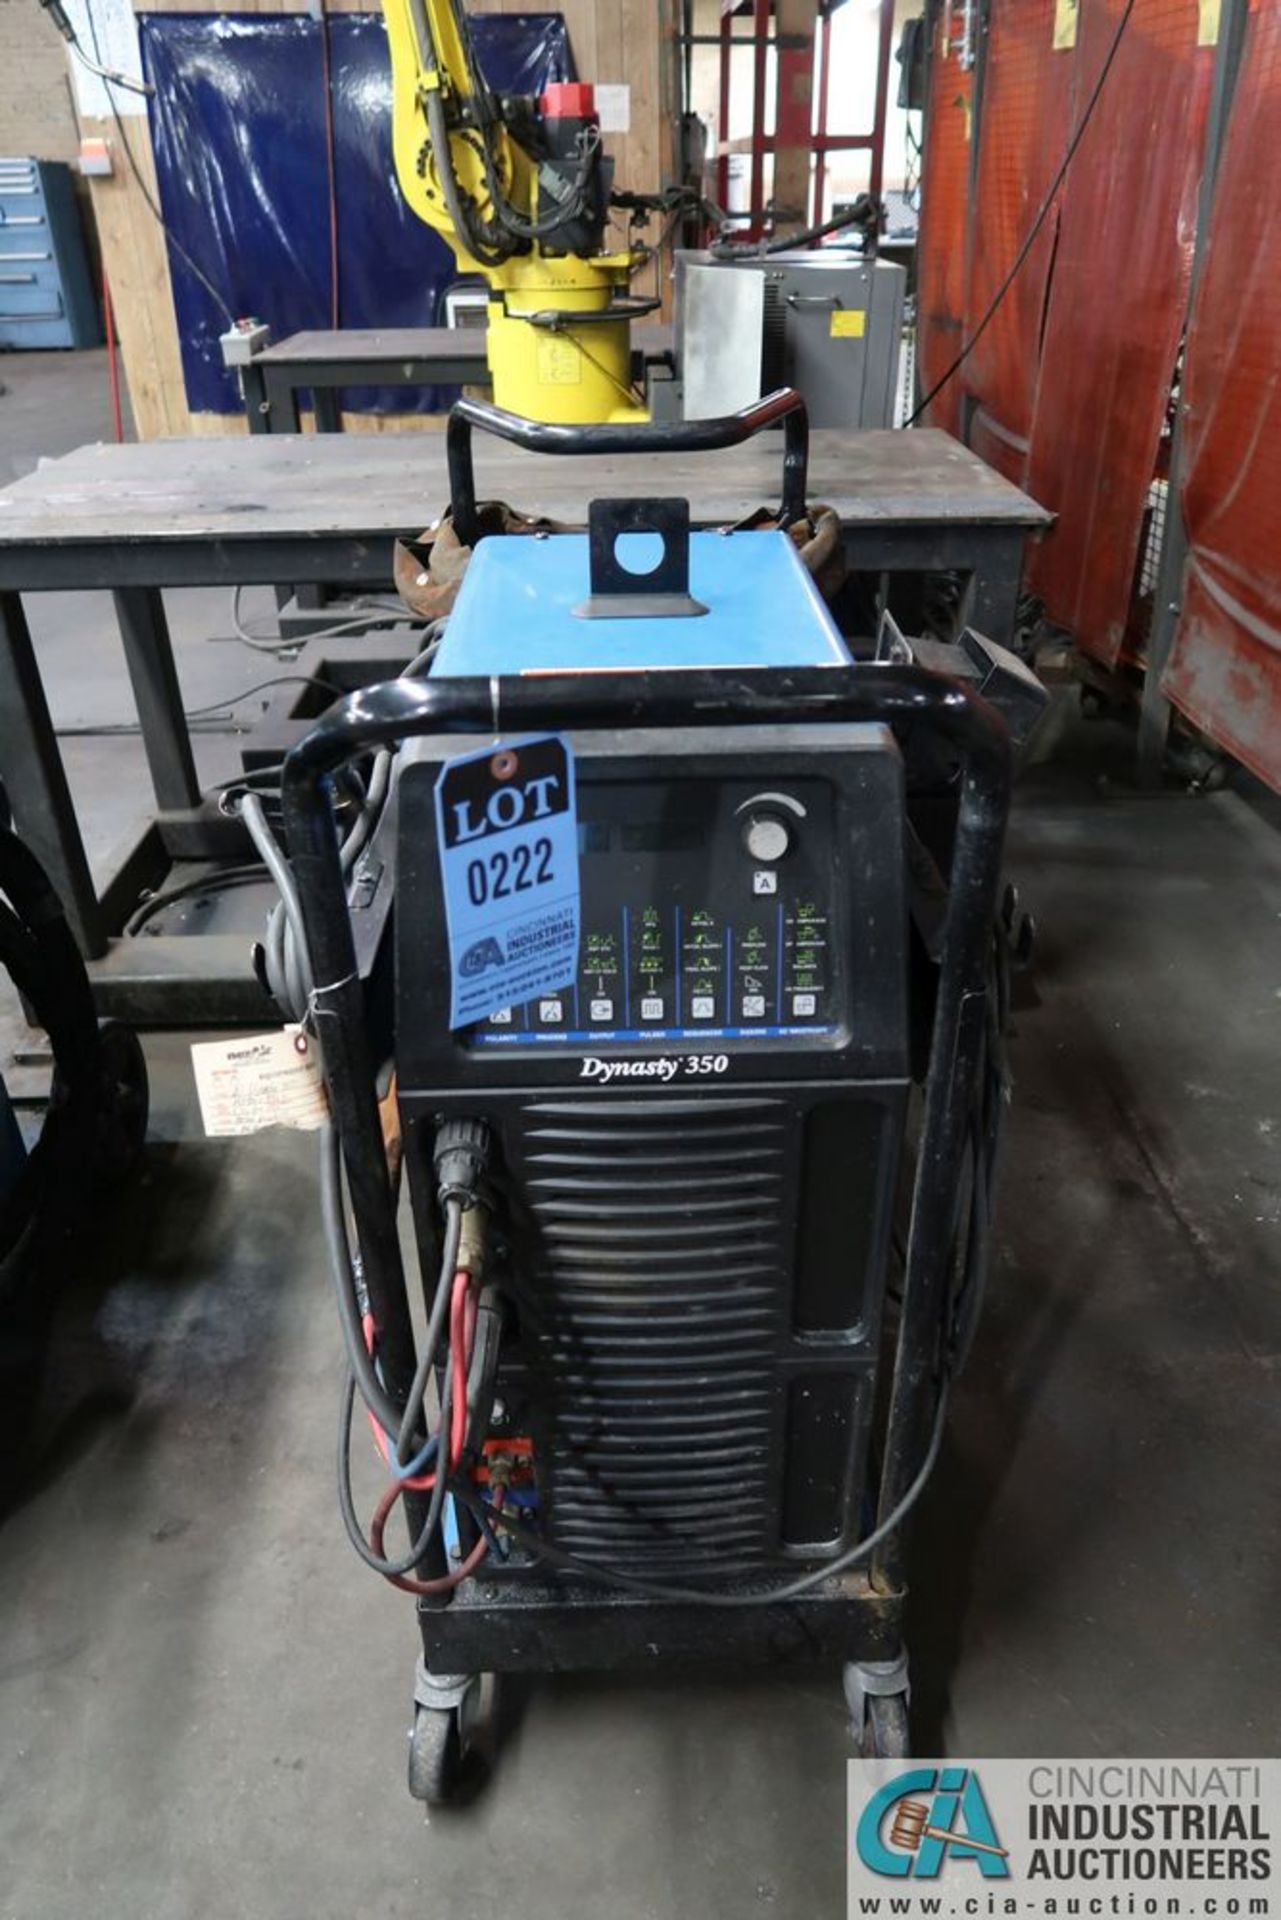 350 AMP MILLER MODEL DYNASTY 350 CART MOUNTED TIG WELDING POWER SOURCE; S/N MF06081L WITH LEADS